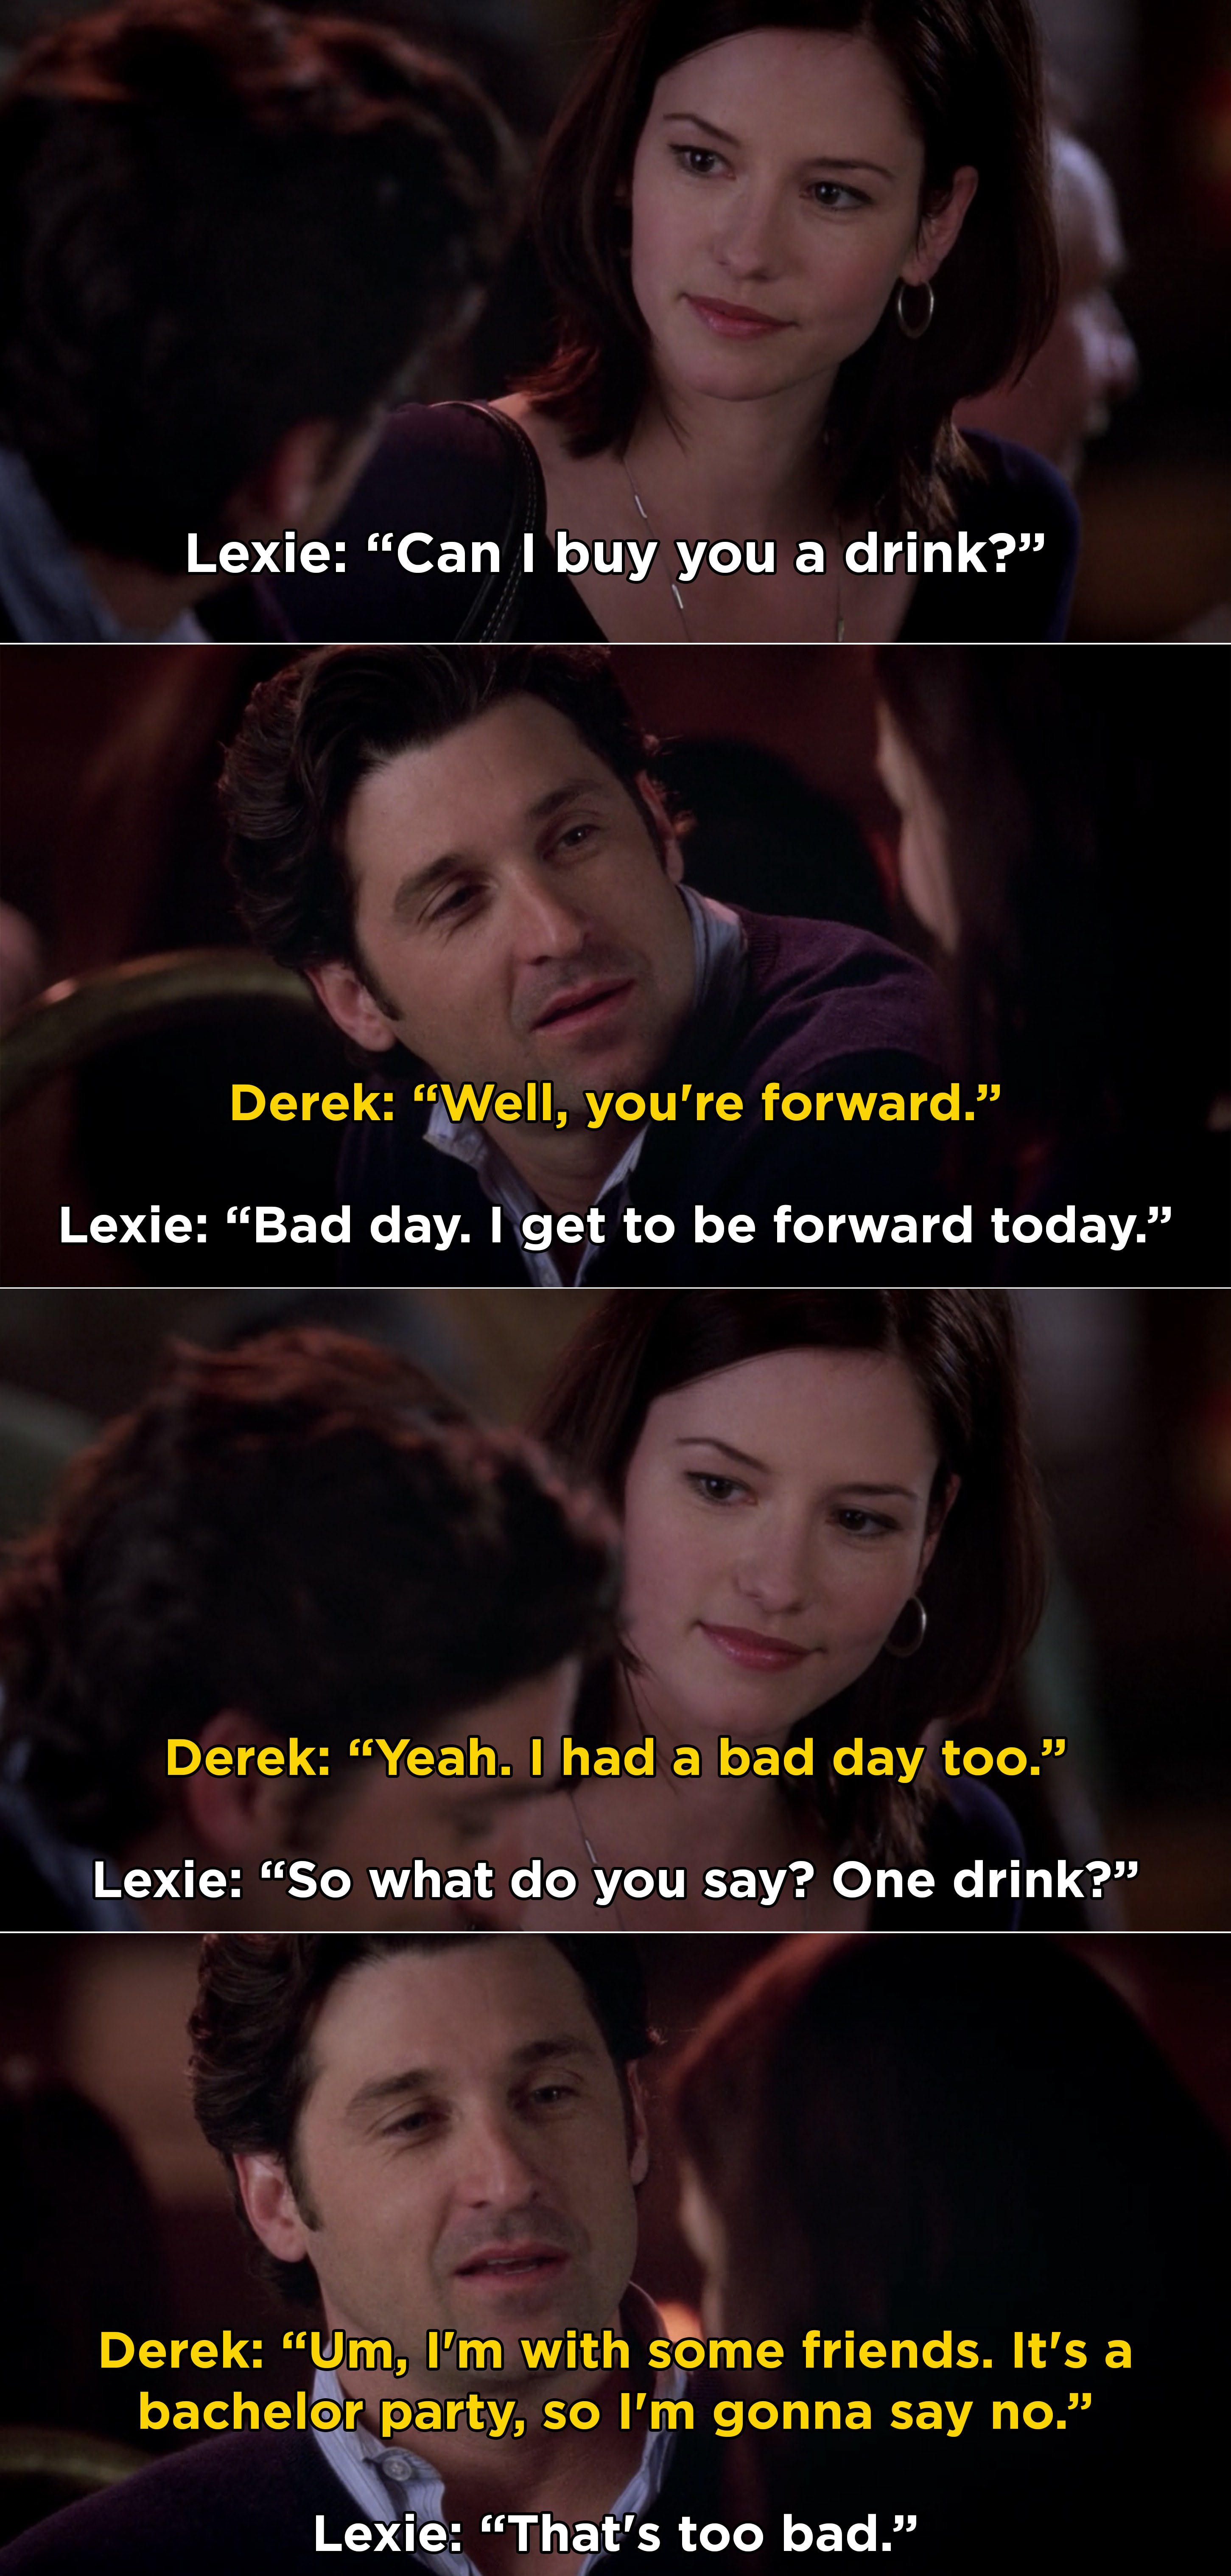 Lexie meeting Derek in a bar and asking to buy him a drink